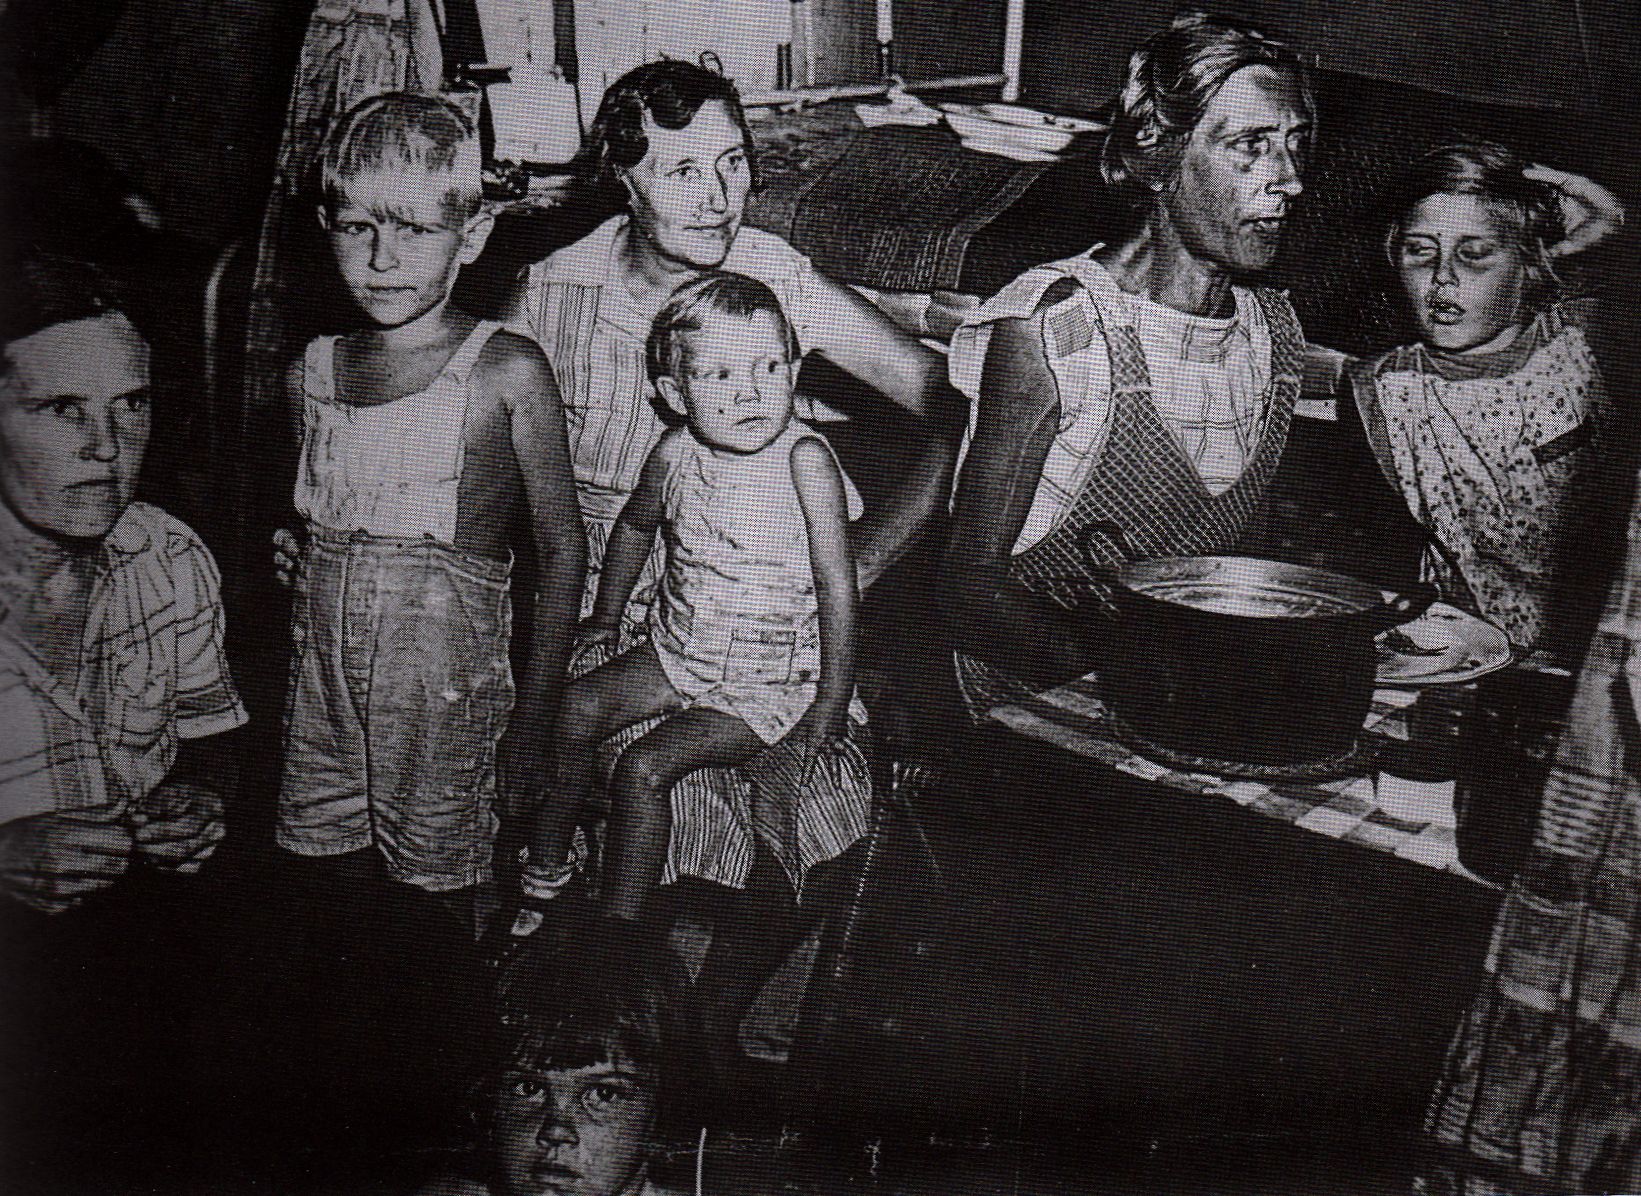 Half-starved women and children in one of the Dutch East Indies camps